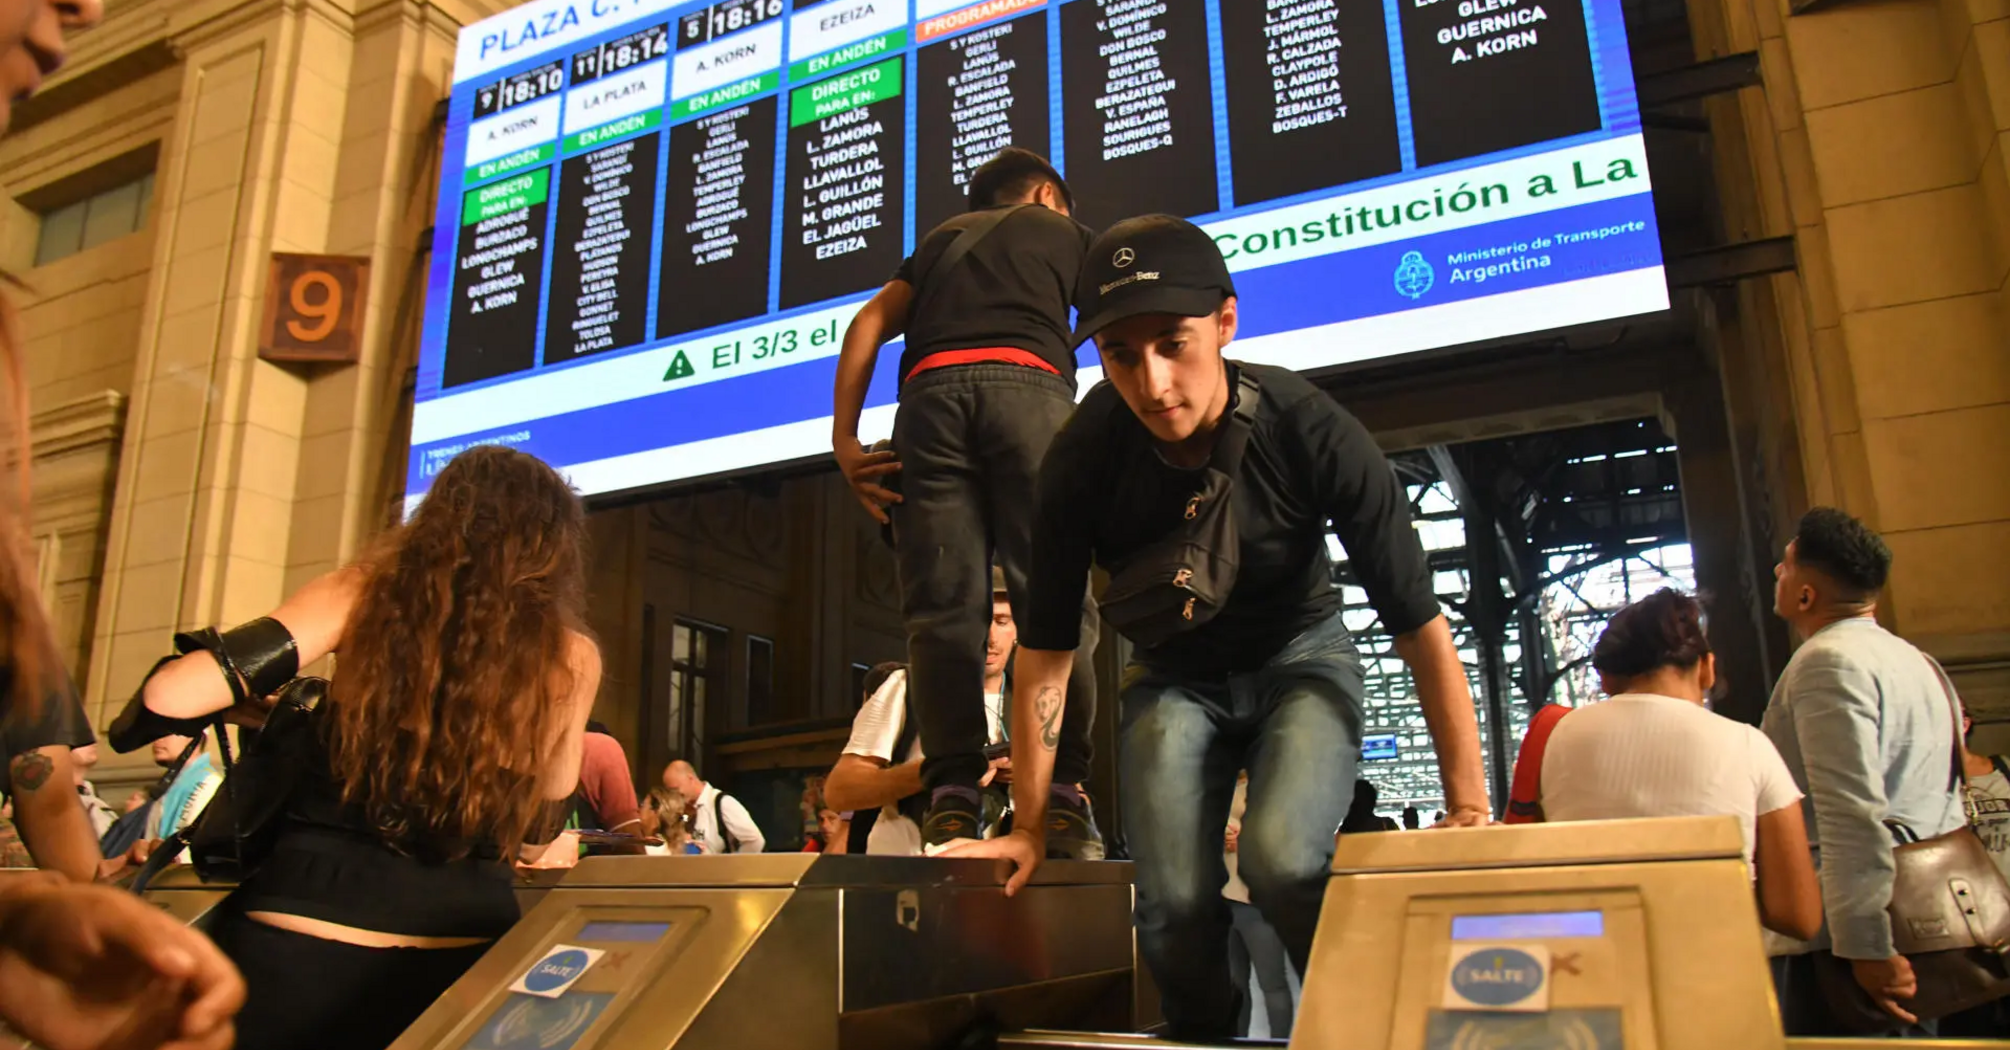 In Buenos Aires, protests took place against the increase in metro fares